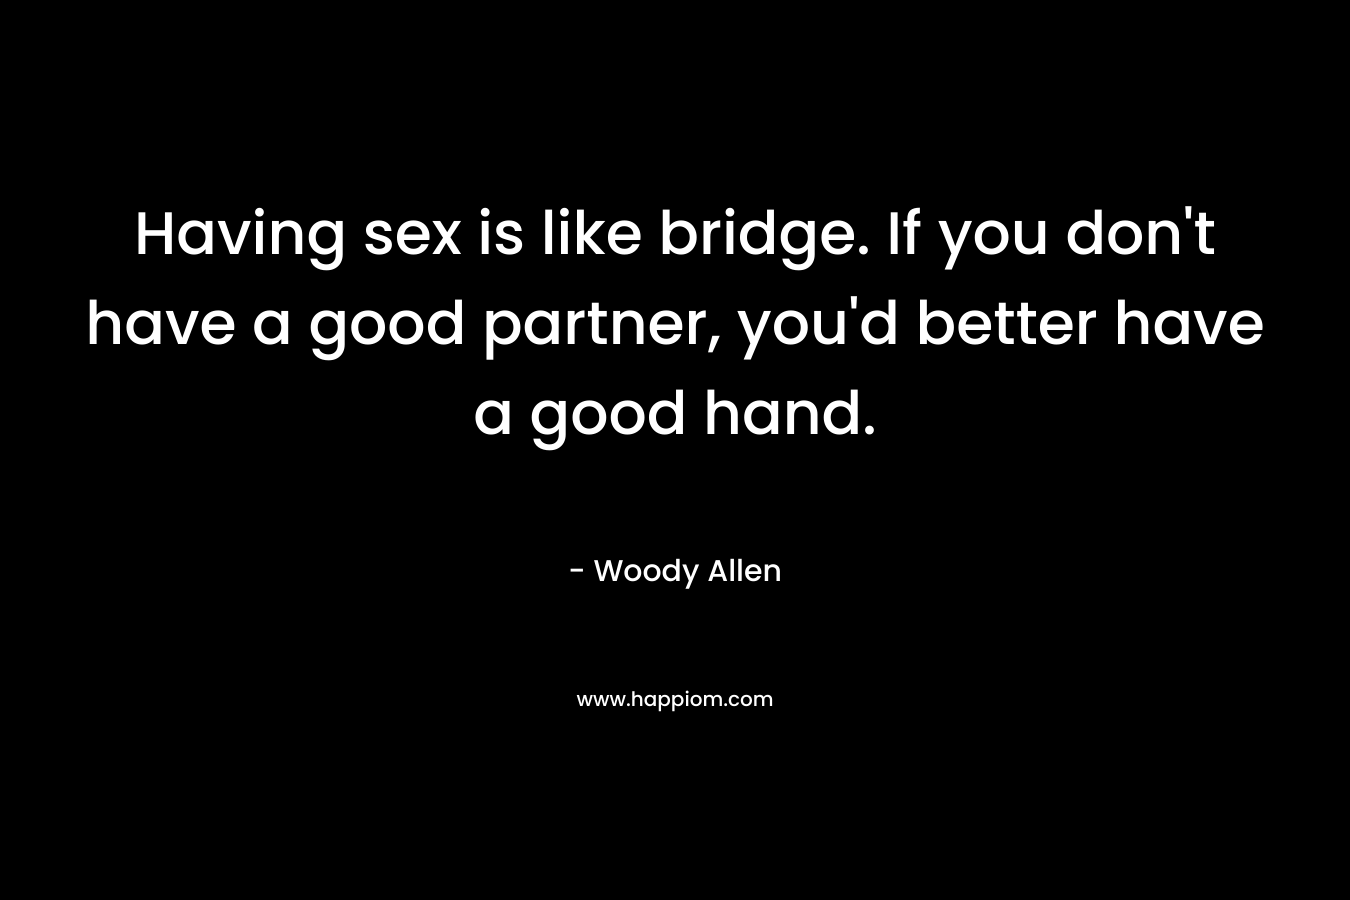 Having sex is like bridge. If you don't have a good partner, you'd better have a good hand.